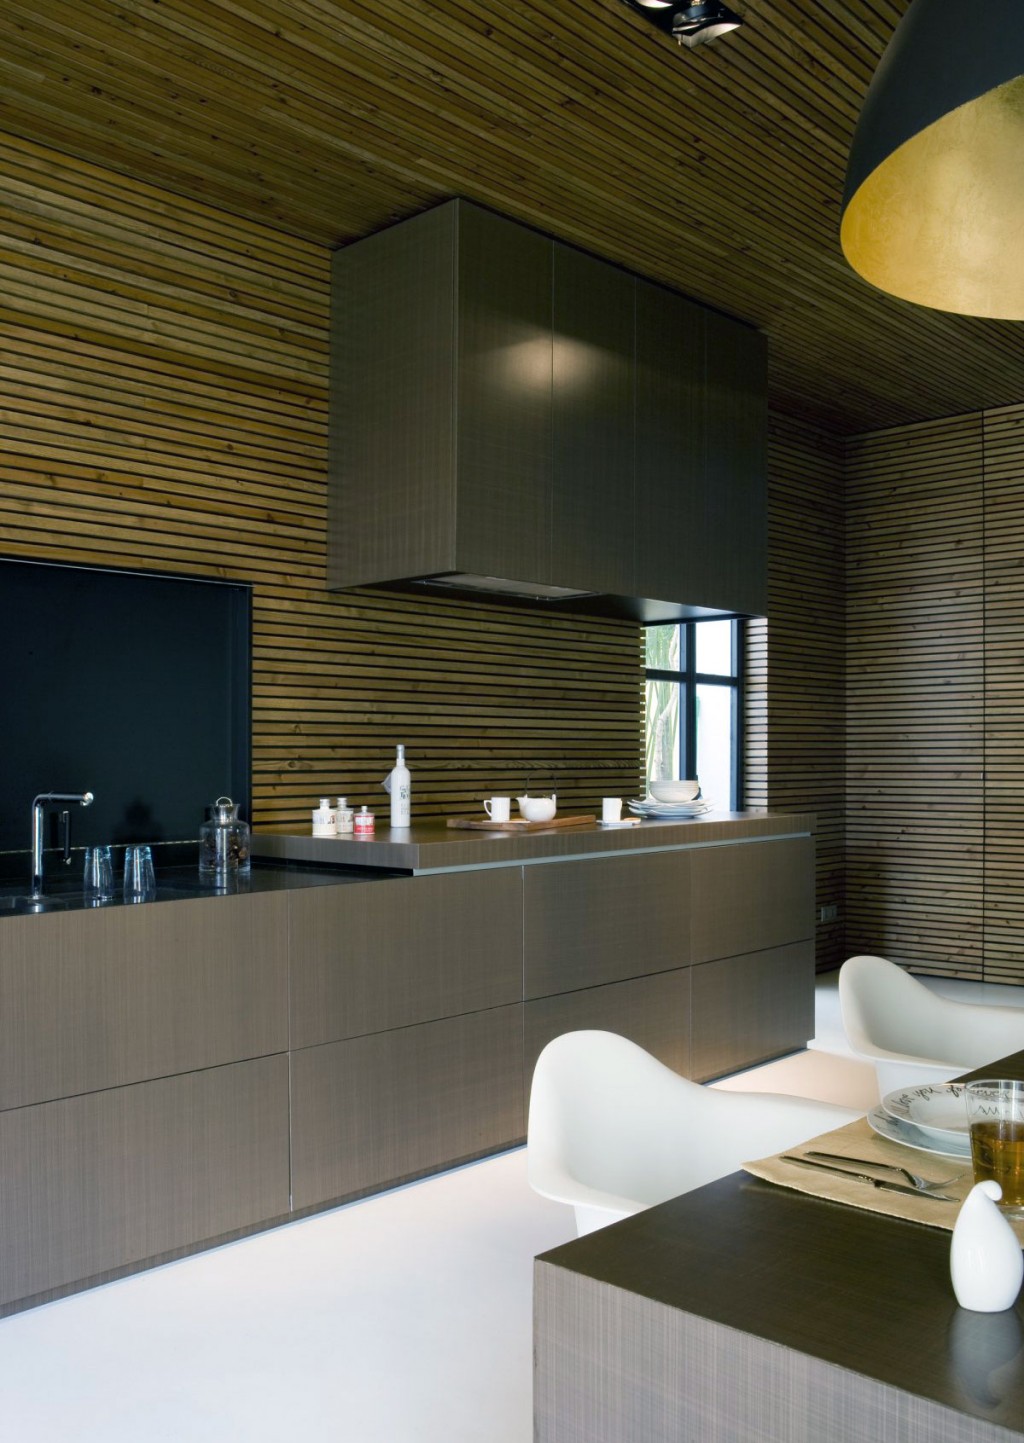 Modern Kitchen with Striped Wall Panel Decor